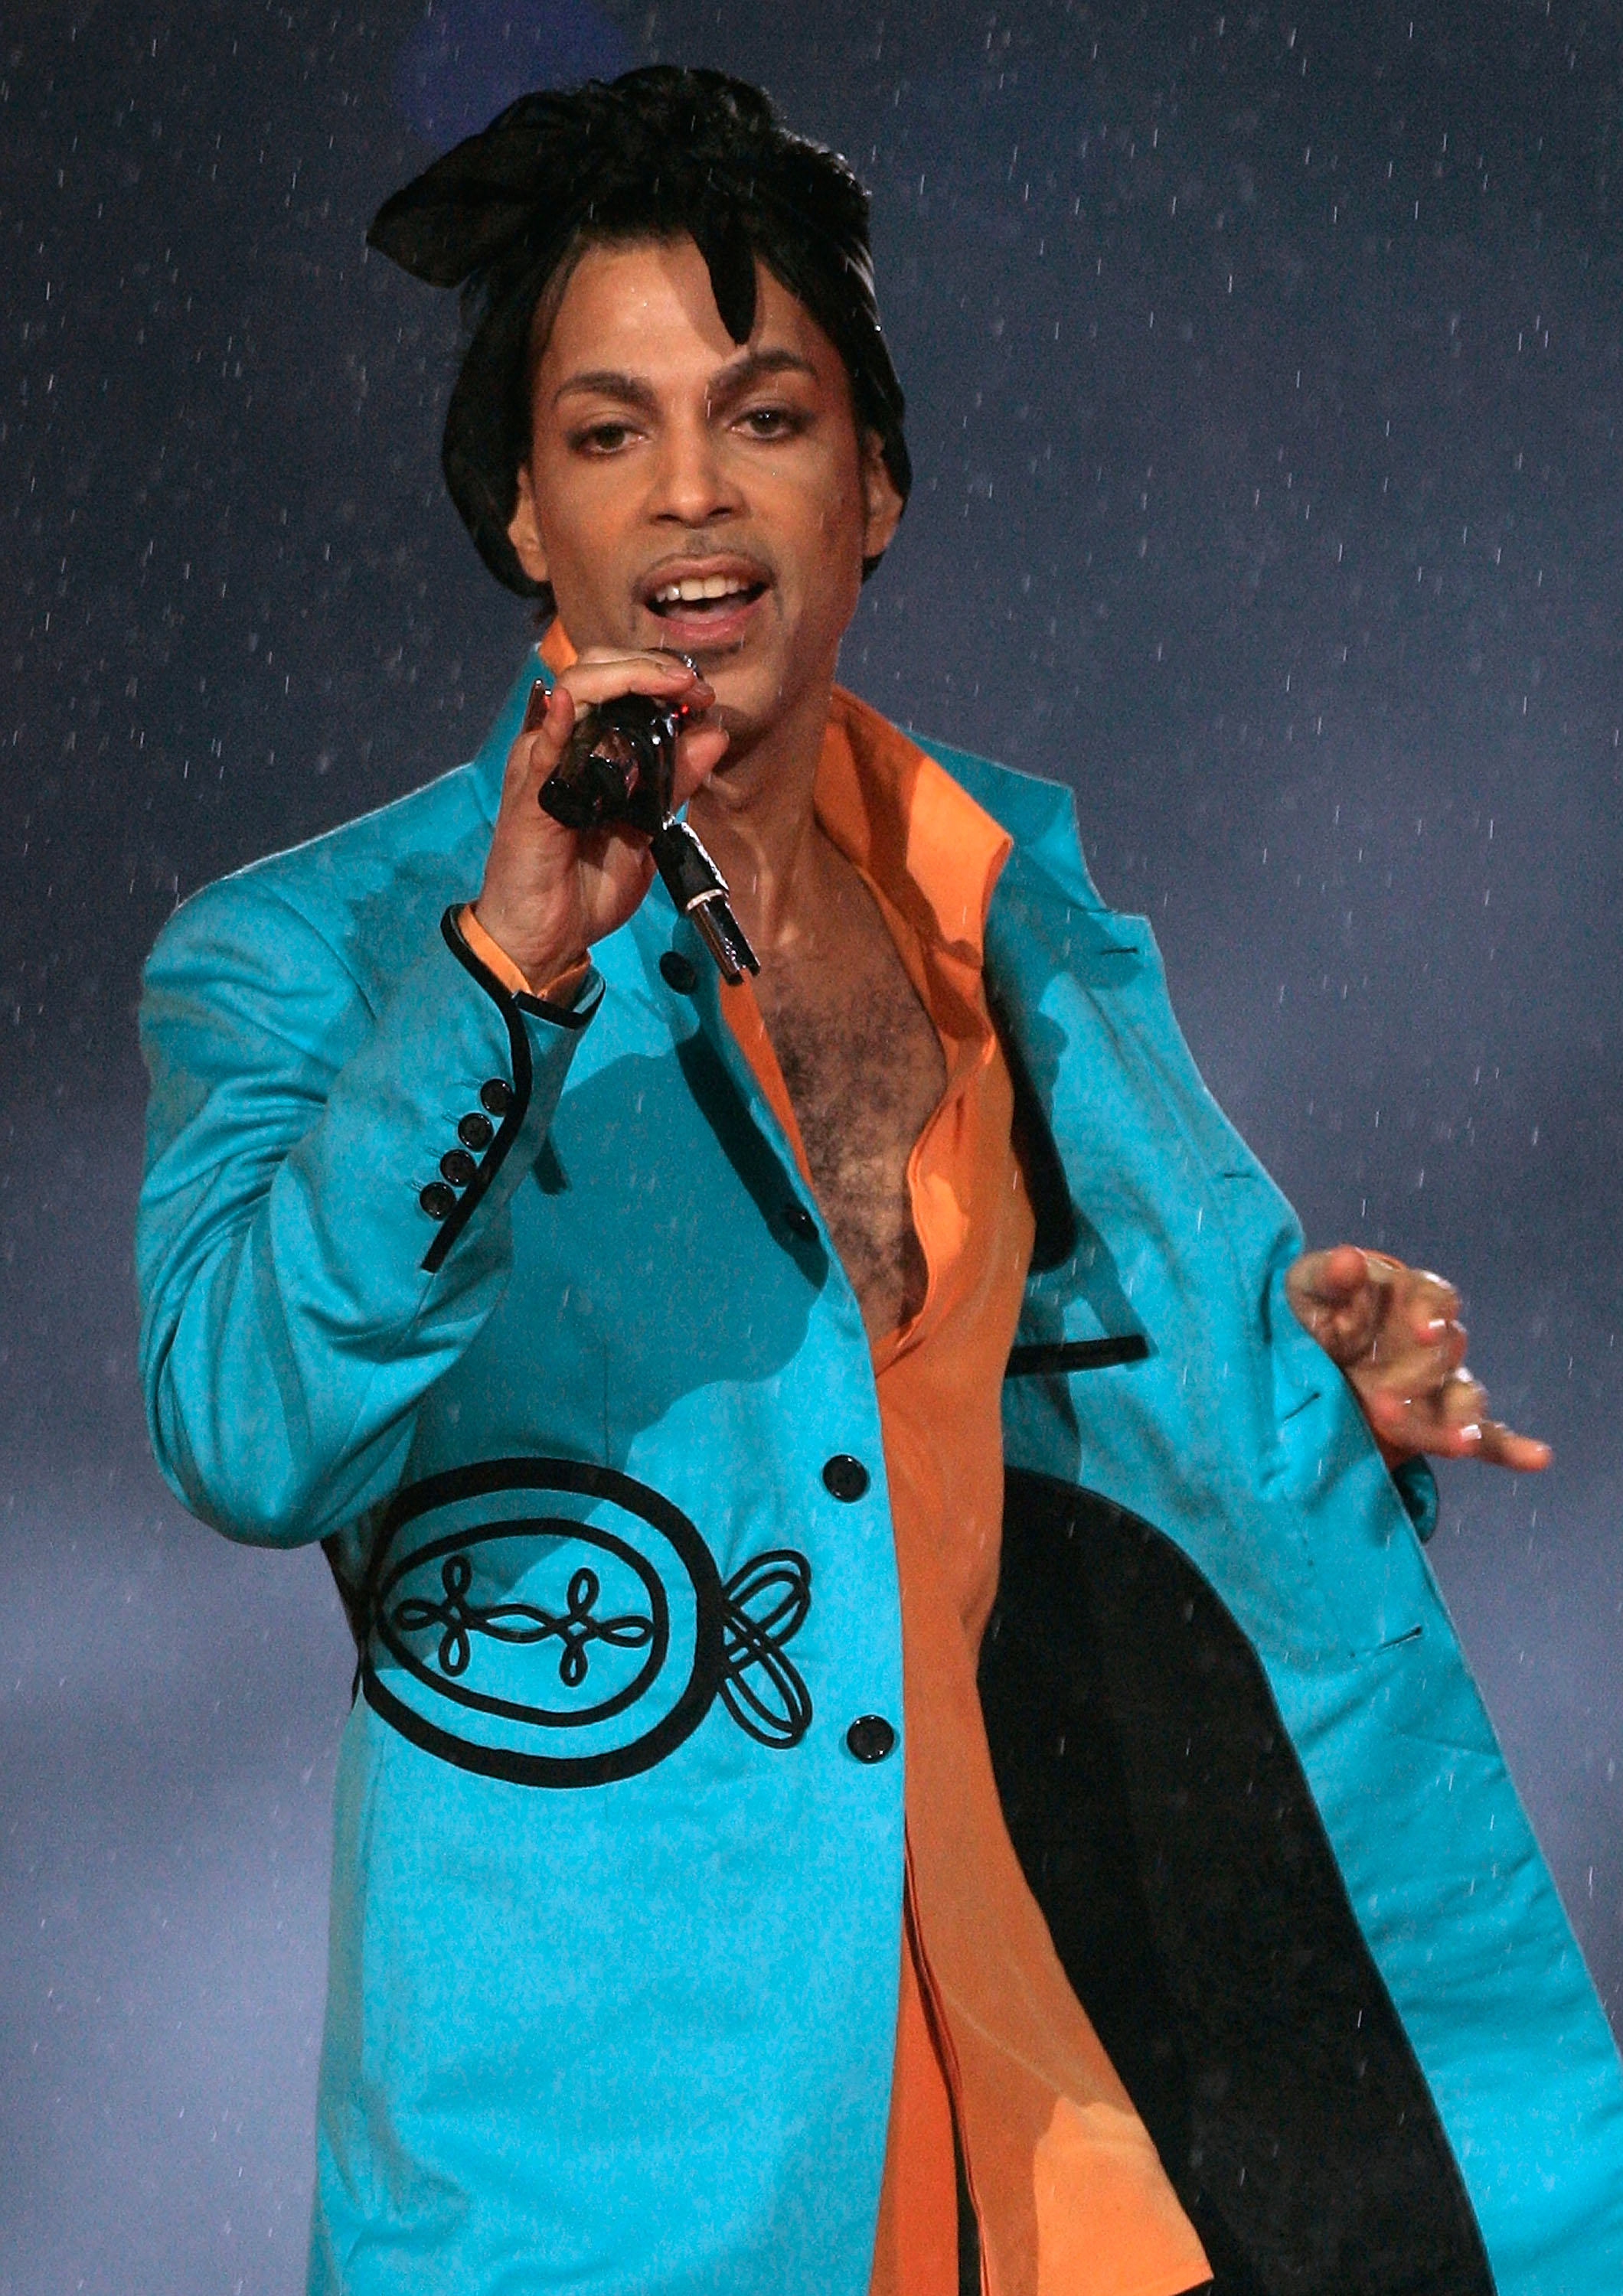 Prince performs at the "Pepsi Halftime Show" during Super Bowl XLI on February 4, 2007 in Miami Gardens, Florida | Source: Getty Images